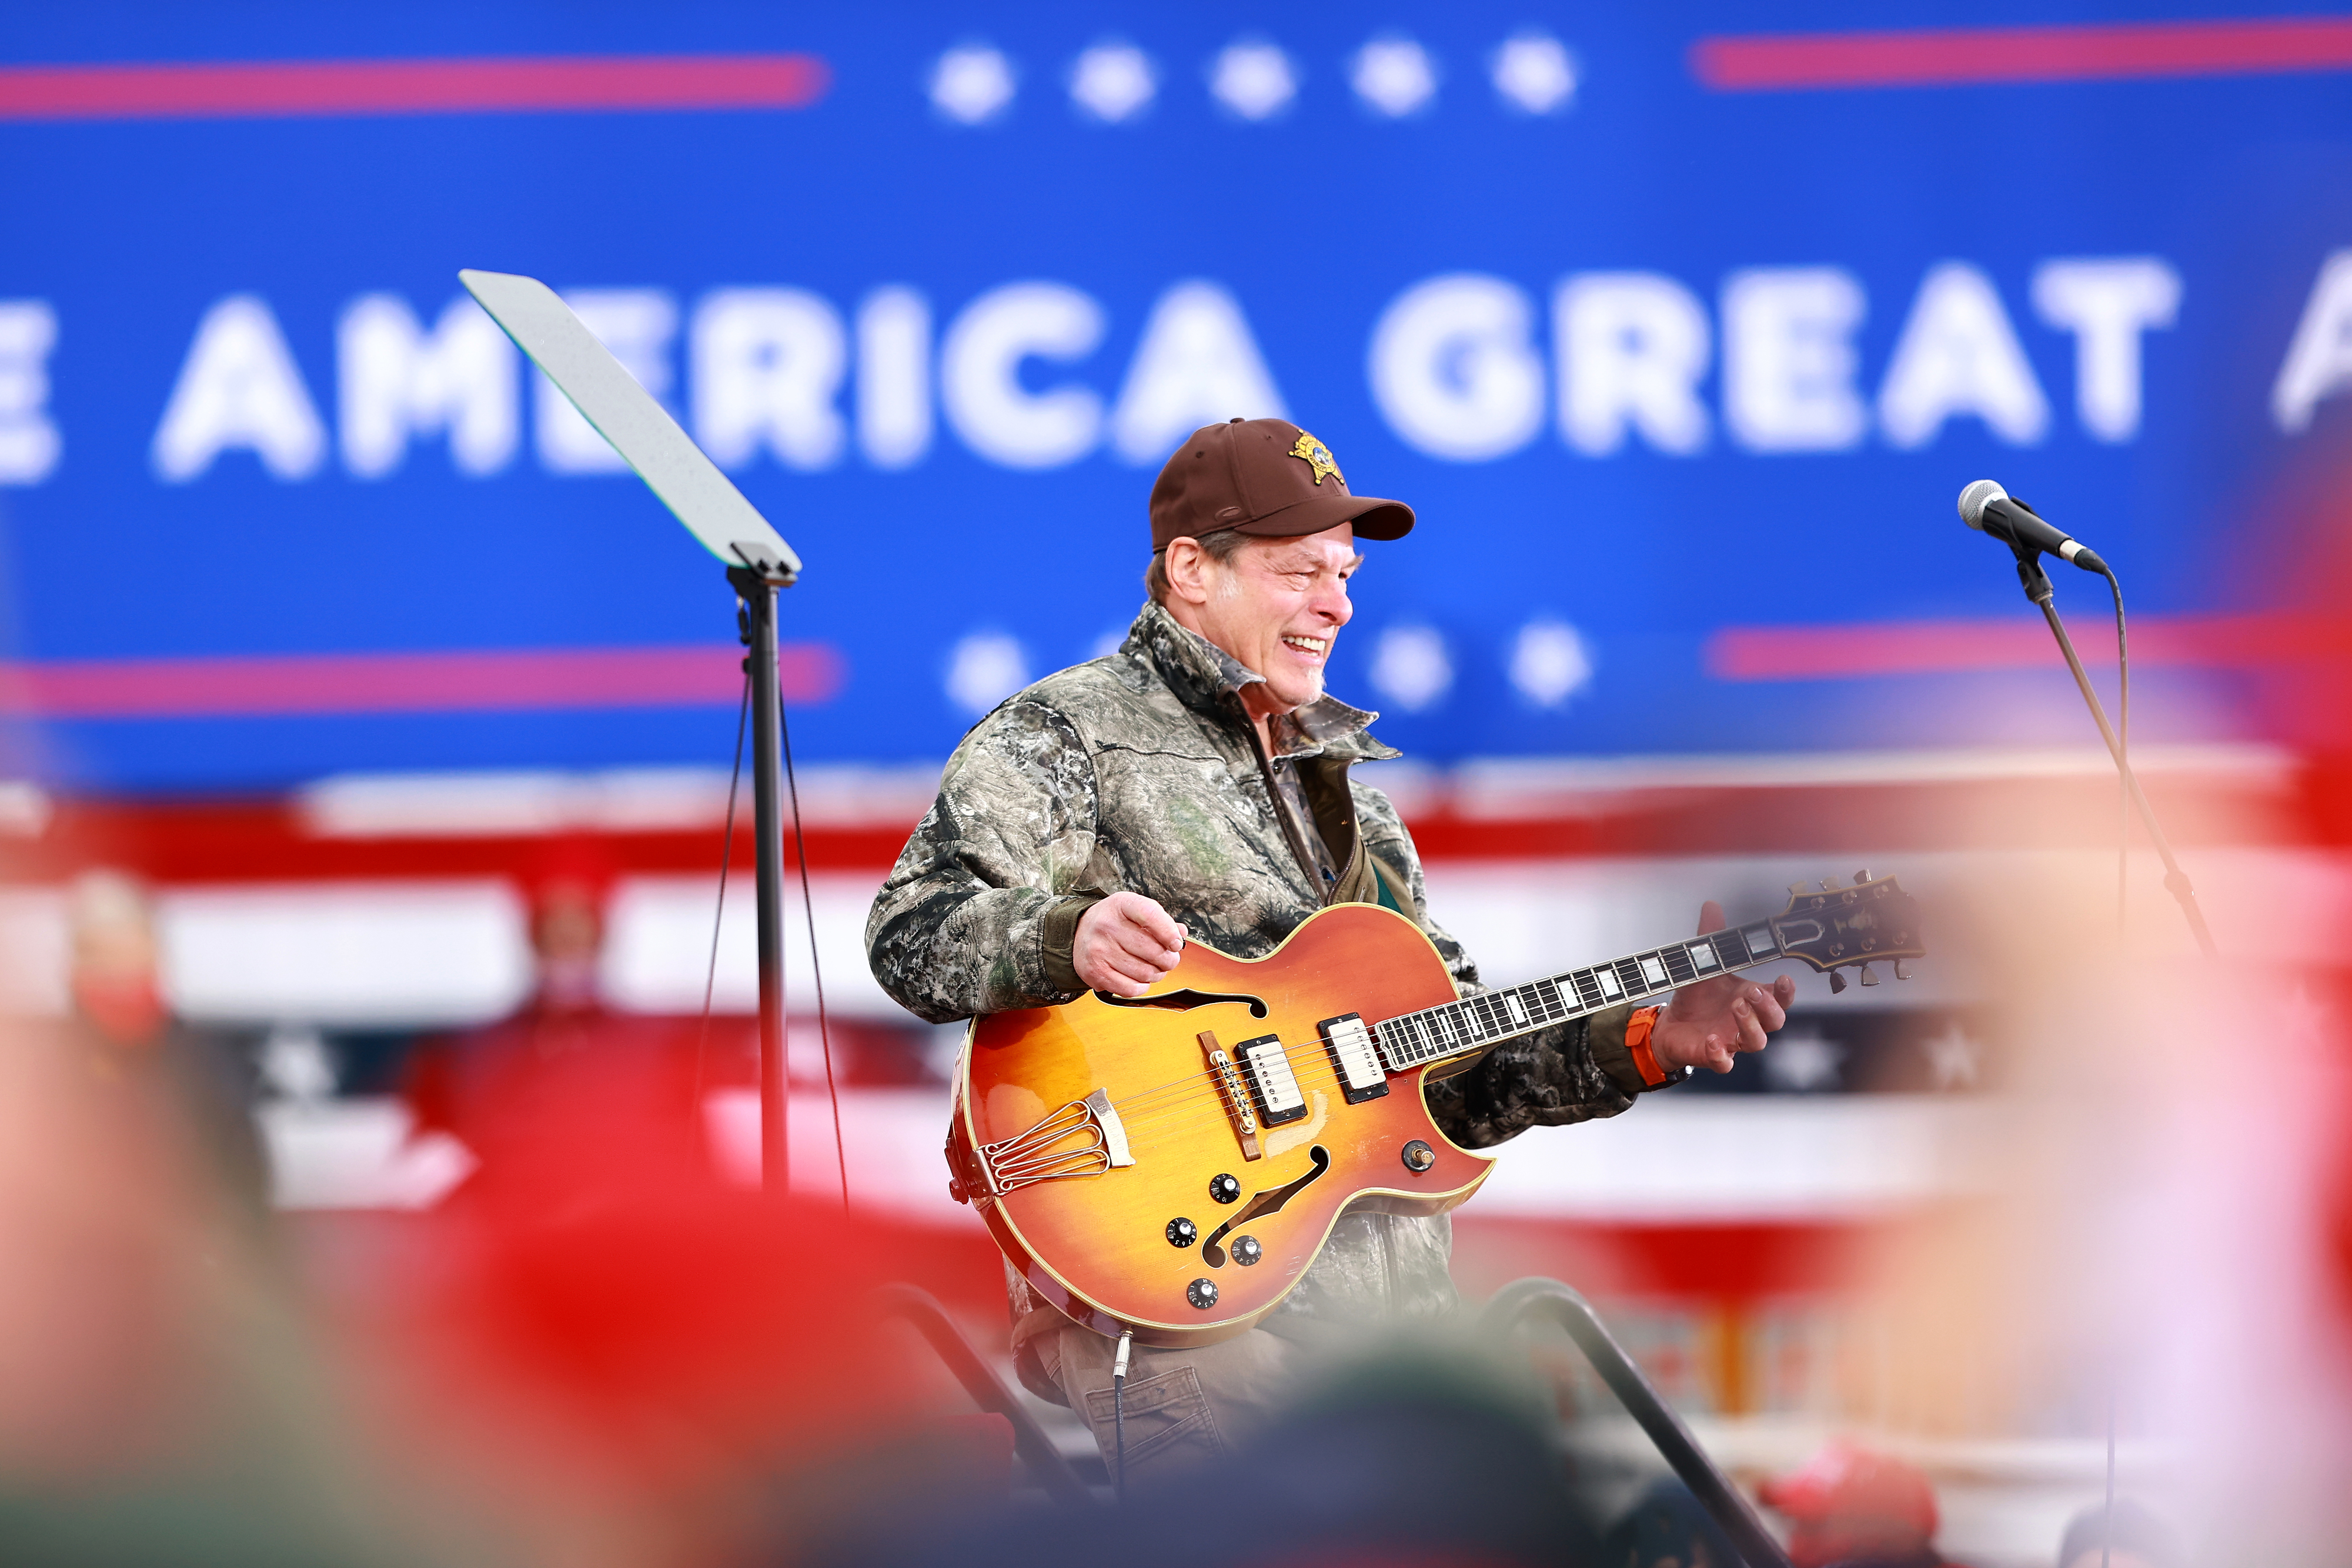 Ted in camouflage jacket playing an electric guitar at a rally with &quot;Make America Great Again&quot; sign in background